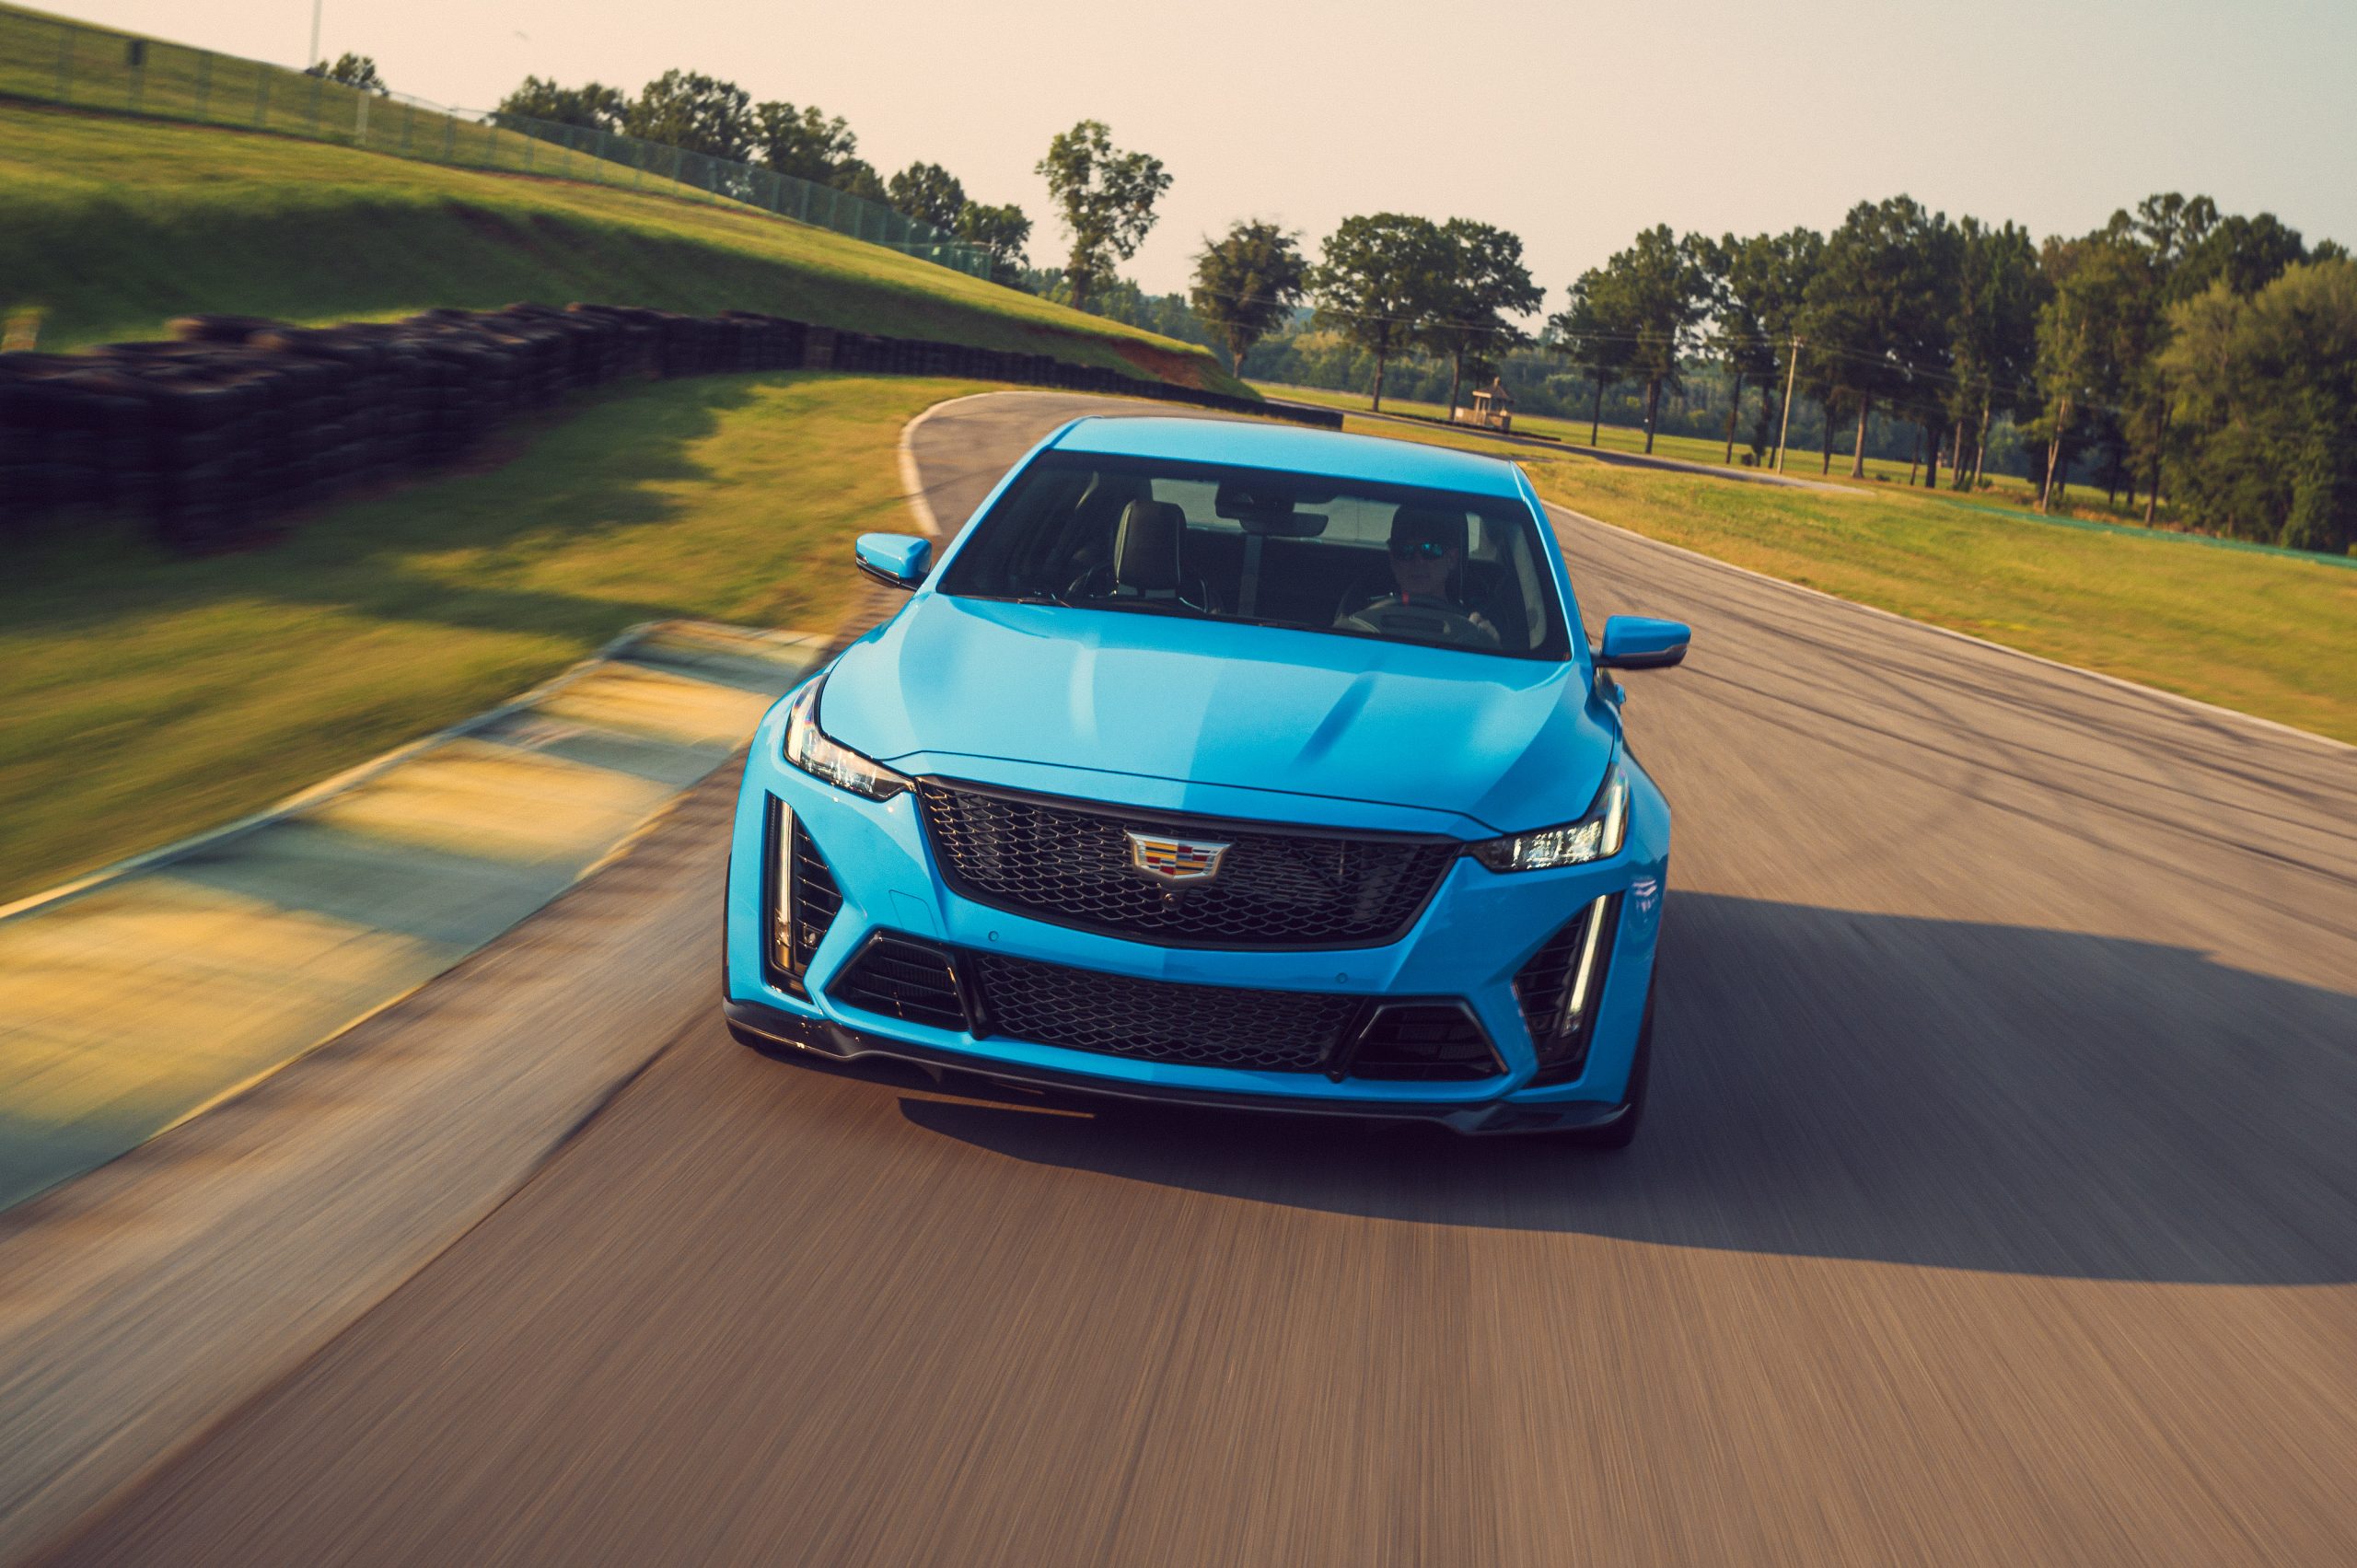 A front view of a blue 2022 Cadillac CT5-V Blackwing cornering on a race track with trees in the background.